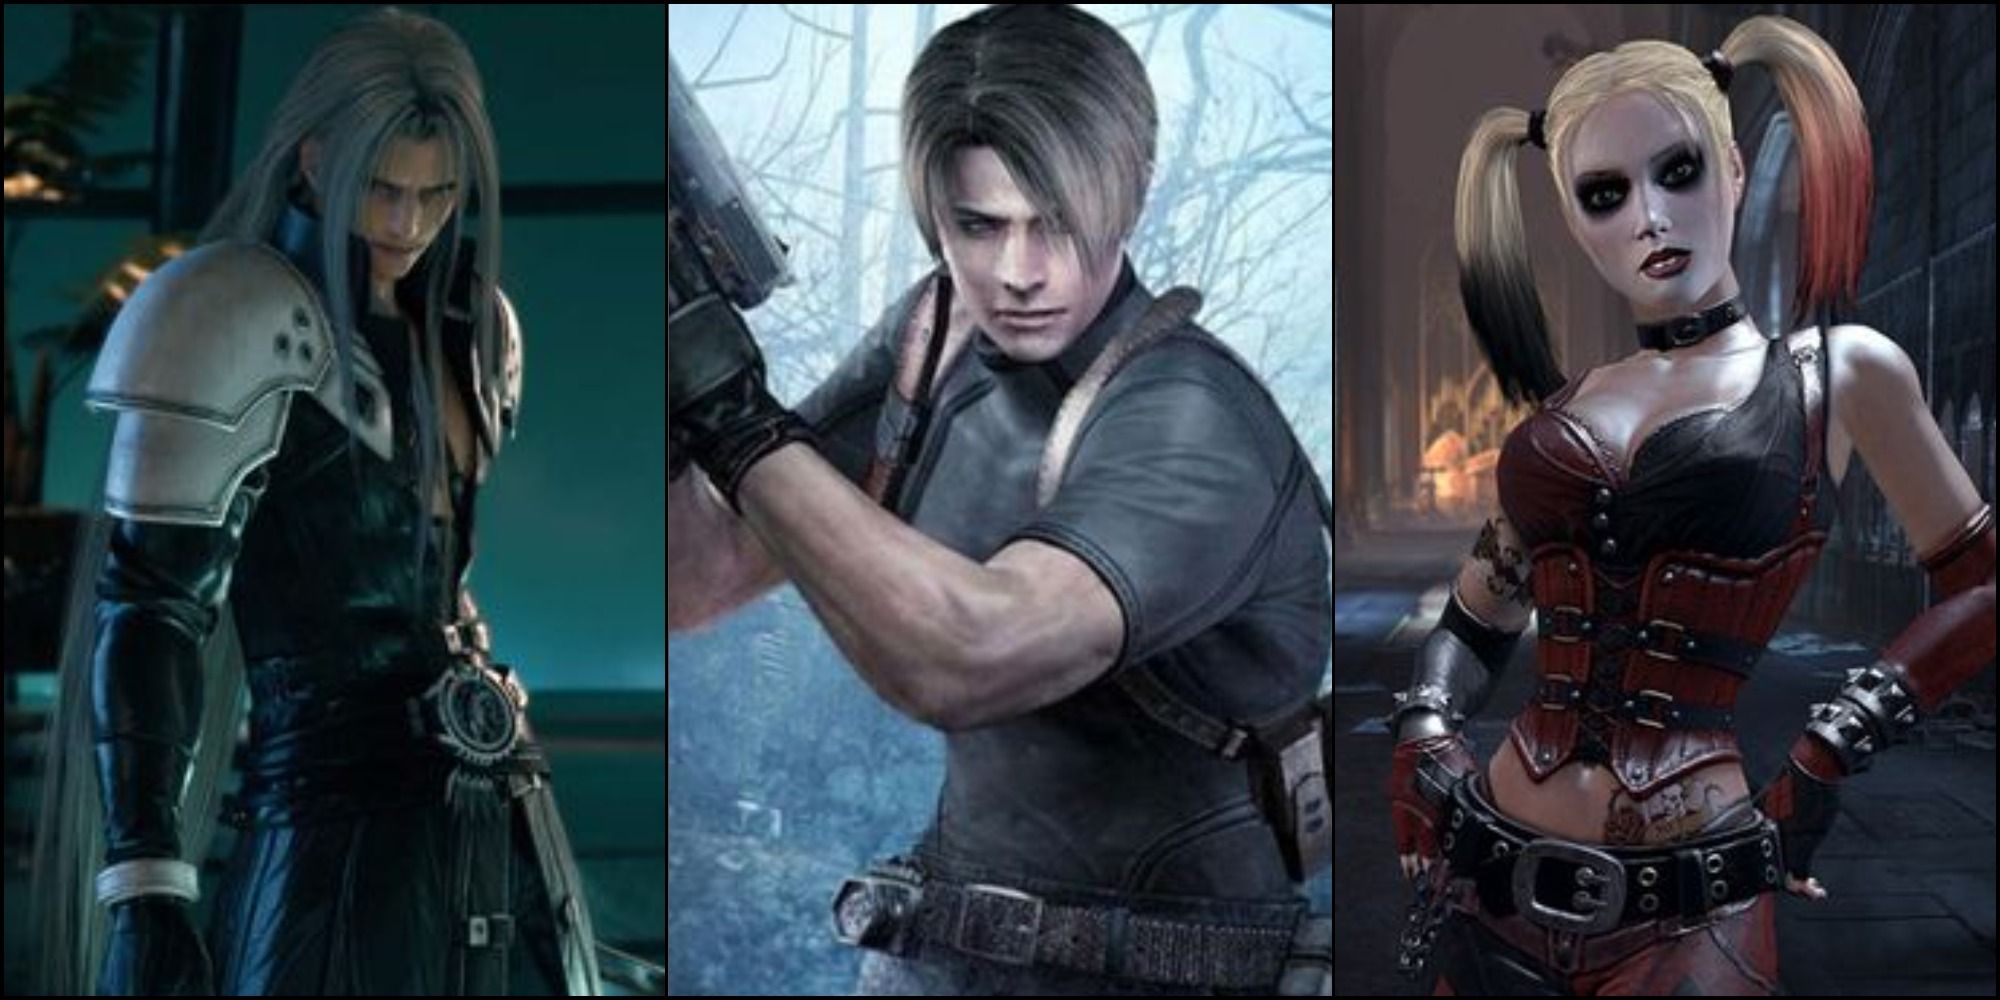 Voice Actor Collage Including Harley, Sephiroth, and Leon